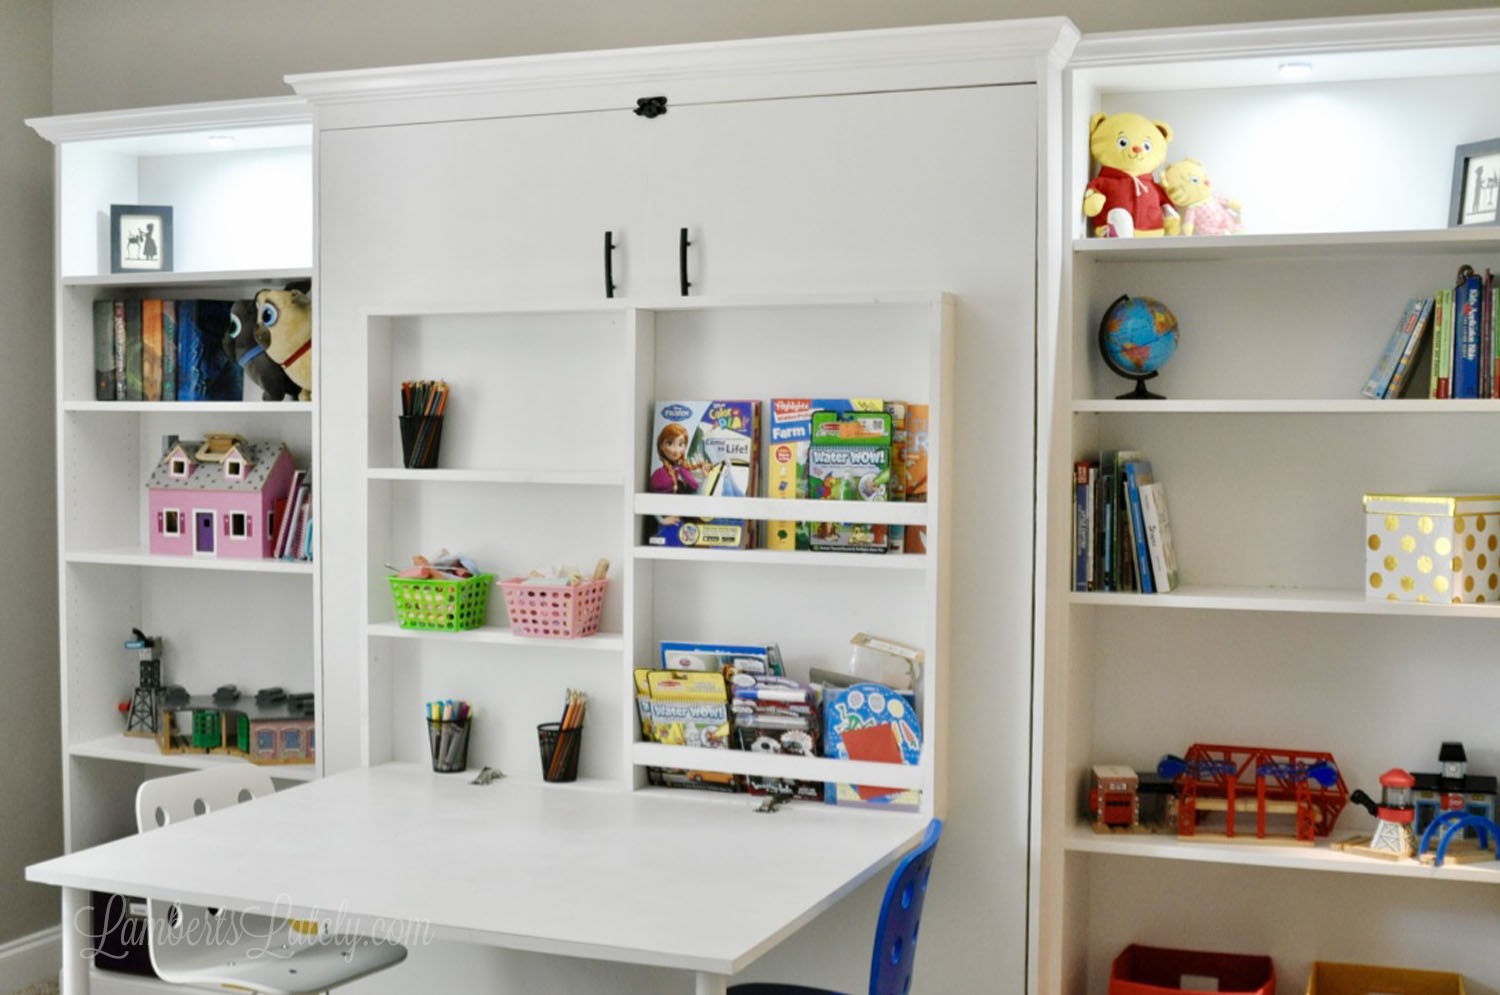 How to build a diy murphy bed with desk and